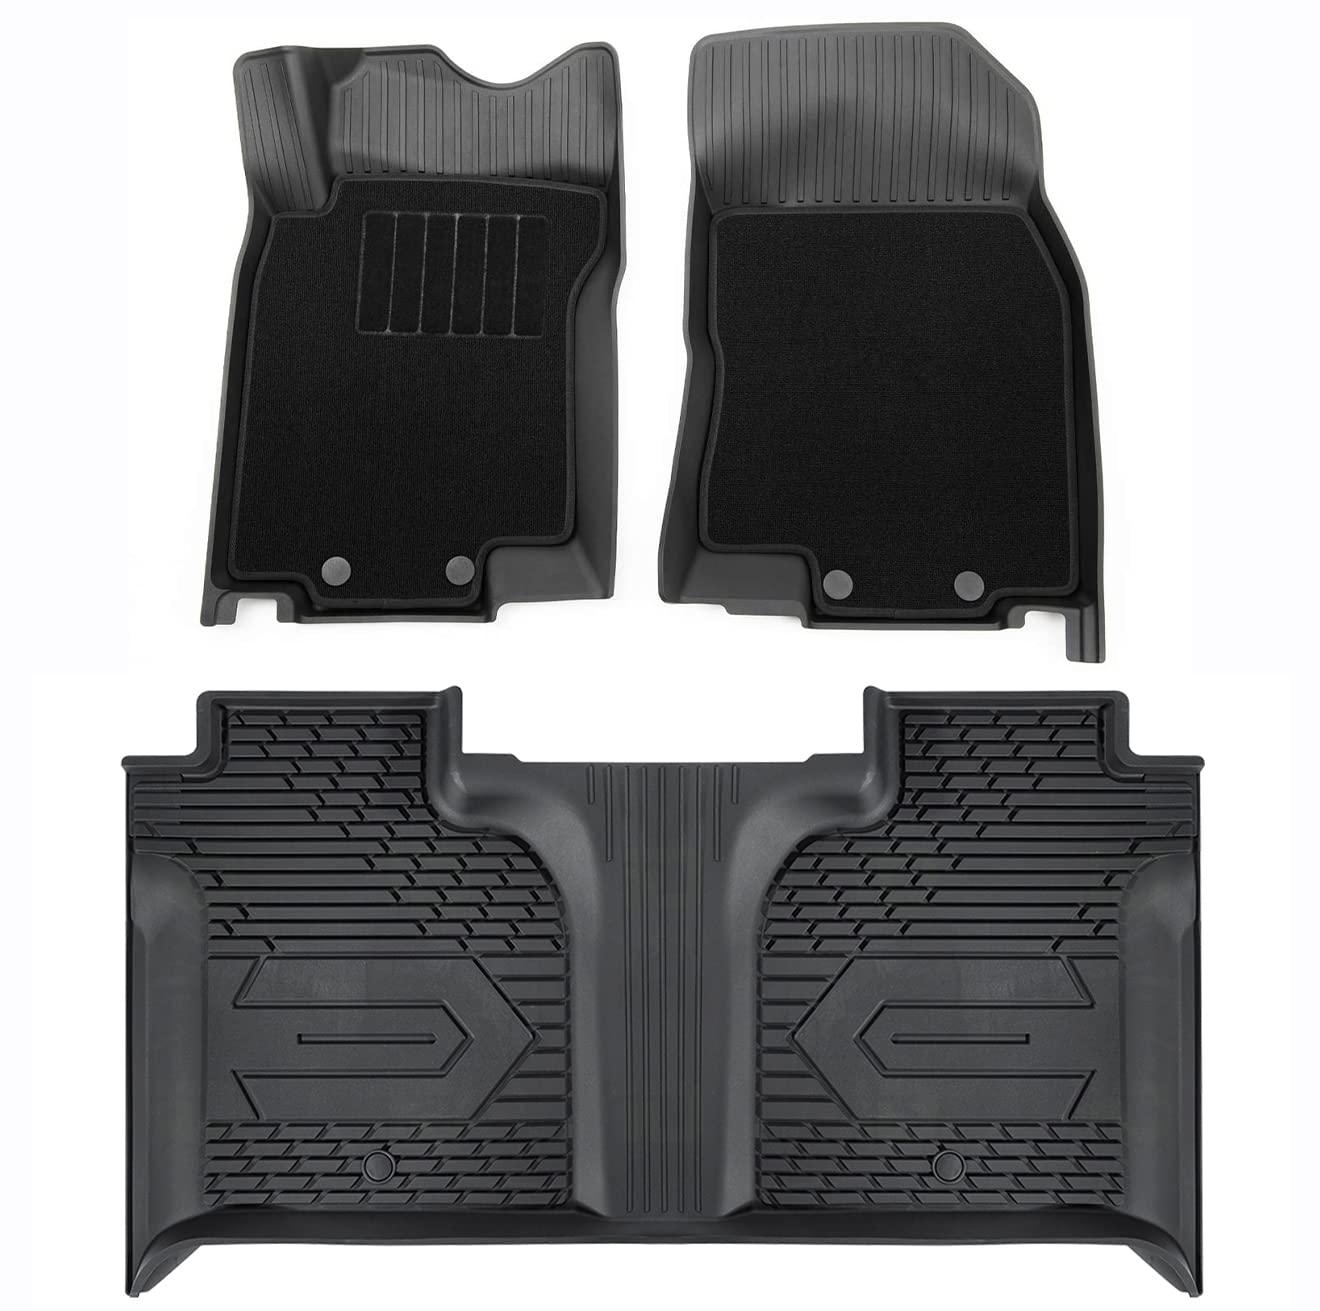 3W Custom Floor Mats 2019-2024 Chevy / Chevrolet Silverado 1500 2500 HD/3500HD Crew Cab TPE Material & All-Weather Protection Vehicles & Parts 3Wliners 2019-2024 Silverado 2019-2024 1st&2nd Row Mats with Front Carpet